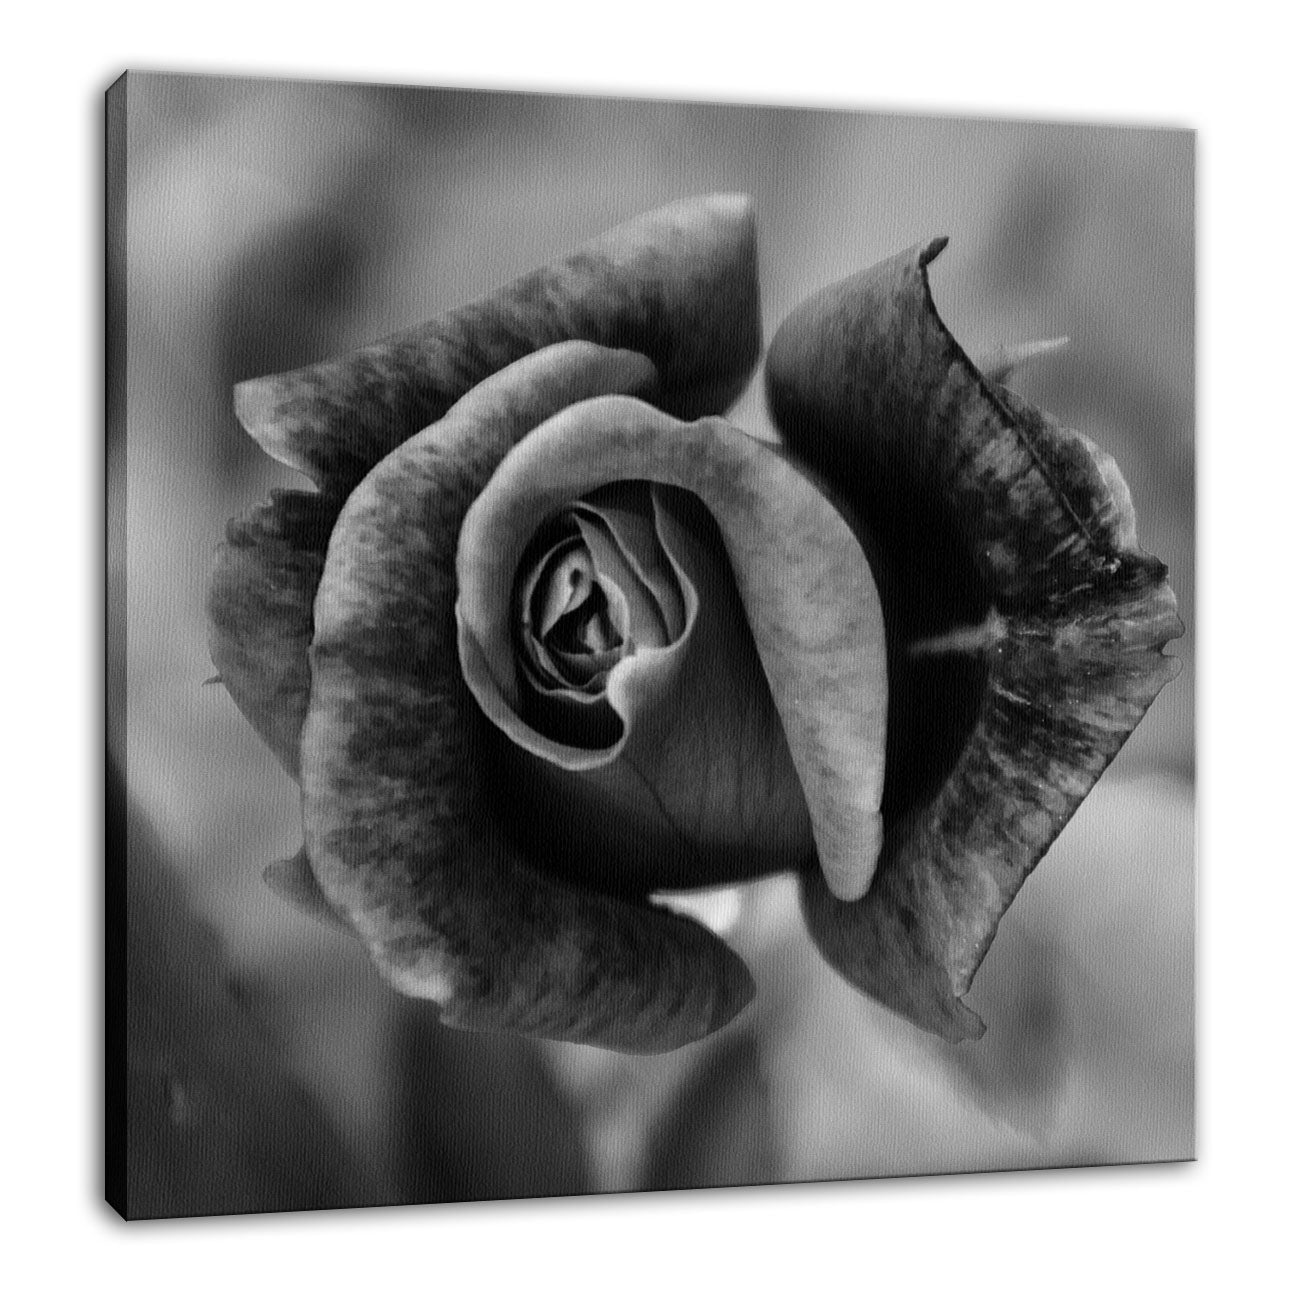 Prince Albert Rose in Black and White - Square Nature / Floral Photo Fine Art & Unframed Wall Art Prints  - PIPAFINEART